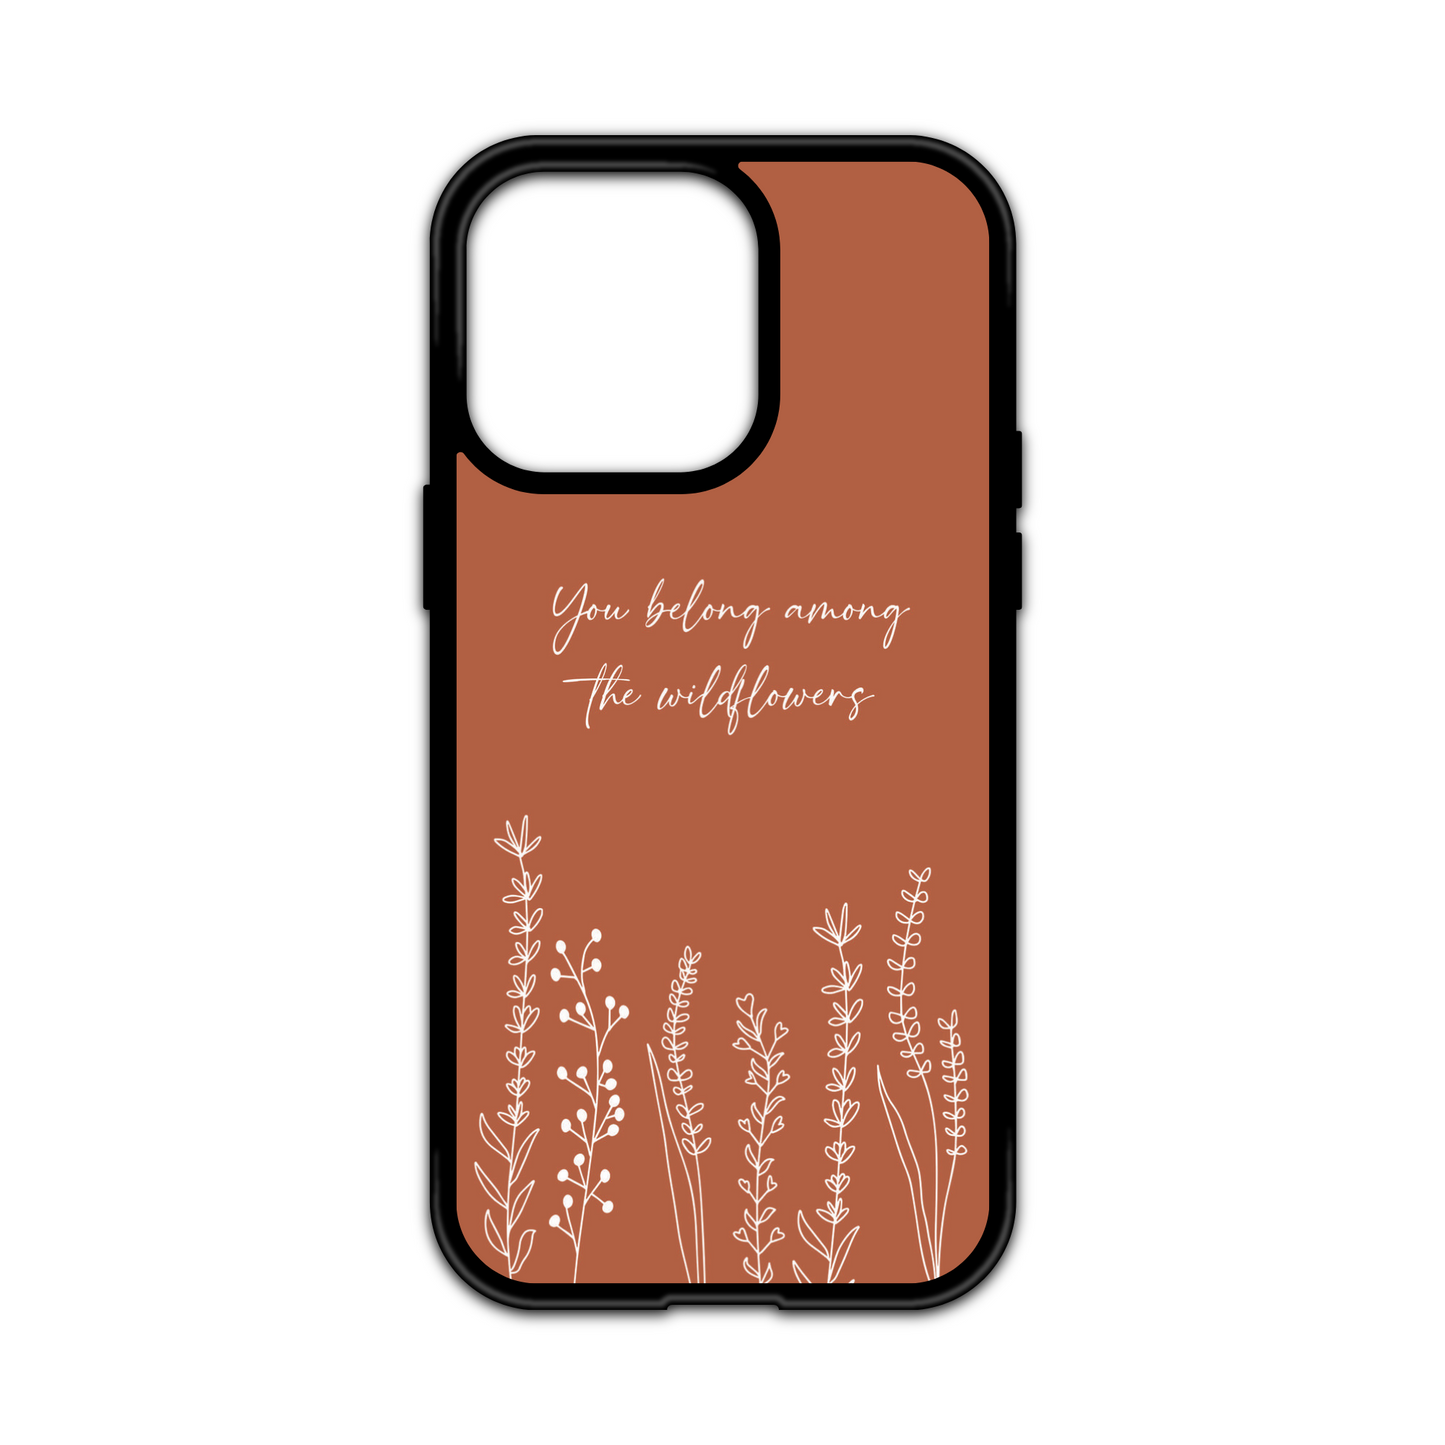 THE WILDFLOWERS IPHONE CASE